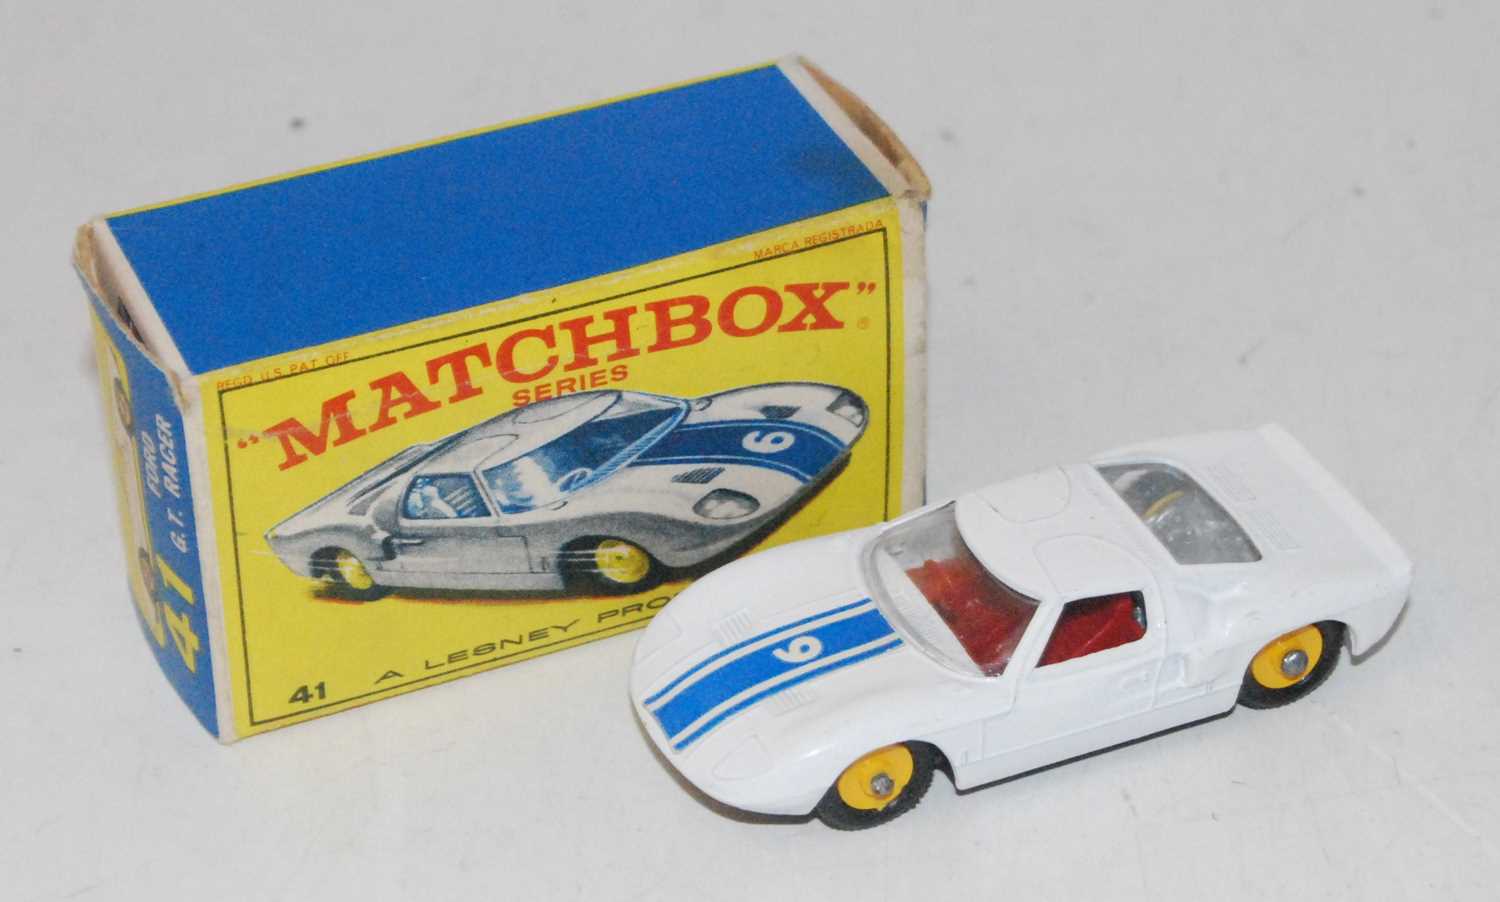 Matchbox 41 Ford GT in E box bonnet label fitted wrong way round a few tiny chips to the white paint